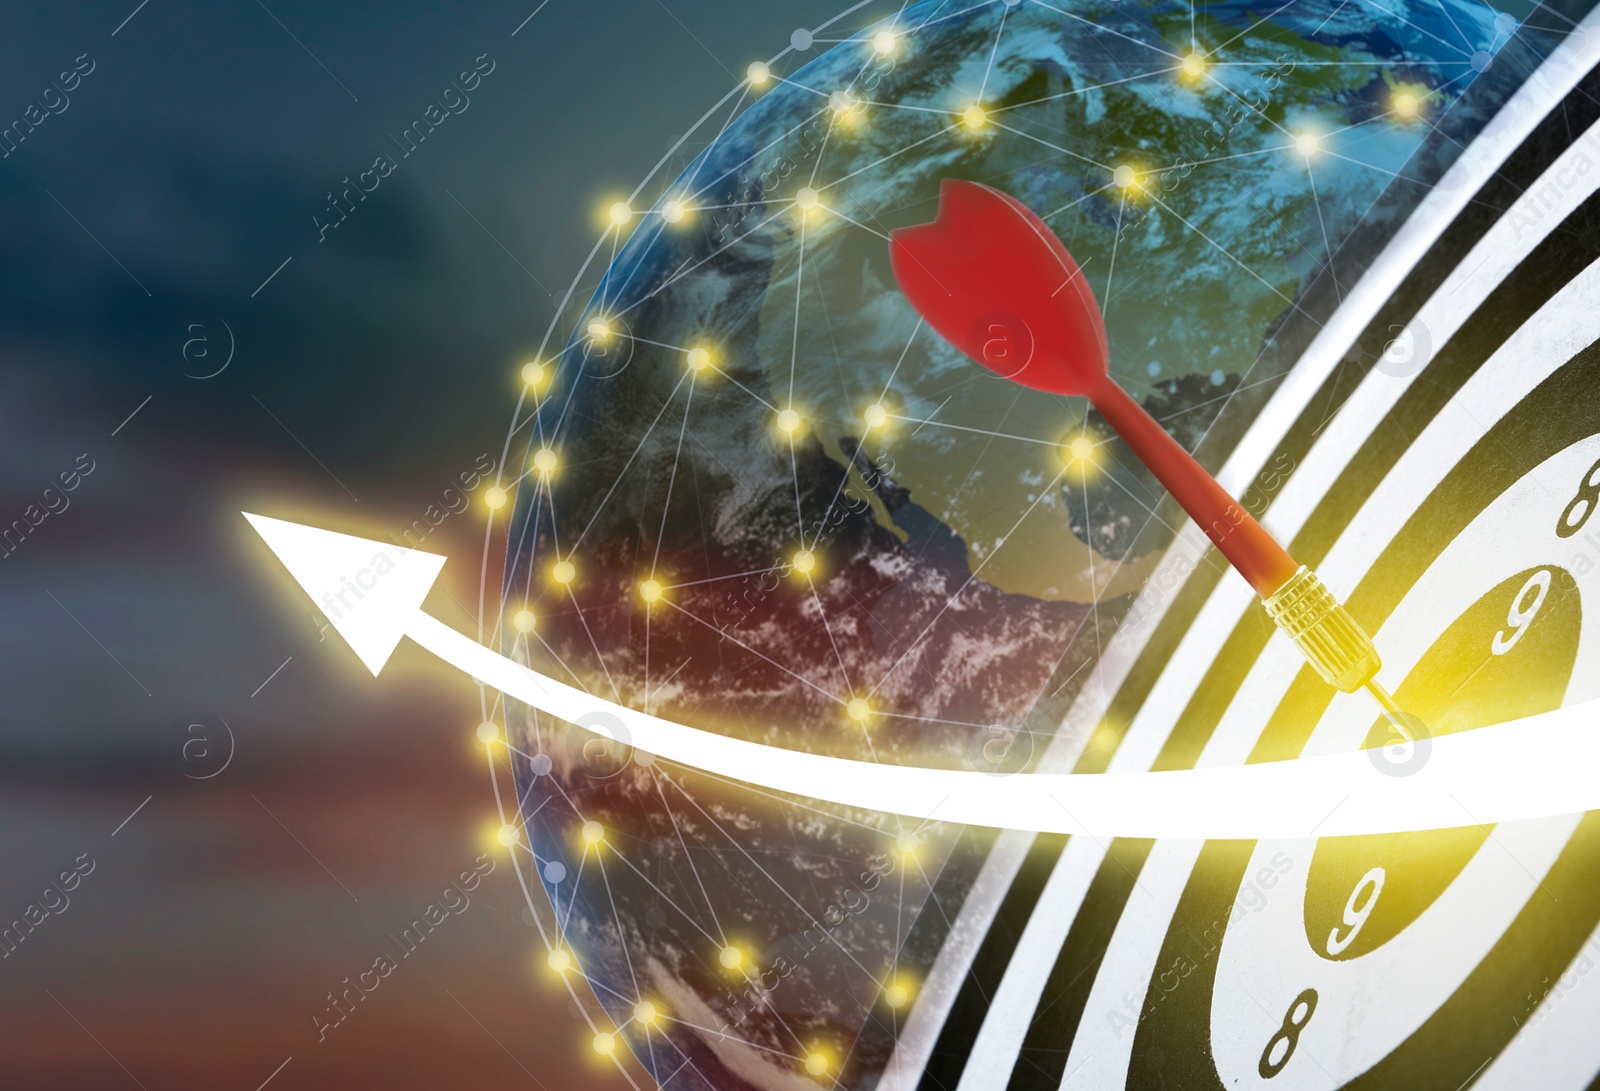 Image of Darts hitting target on board, illustration of graph, Earth planet and view sky at sunset